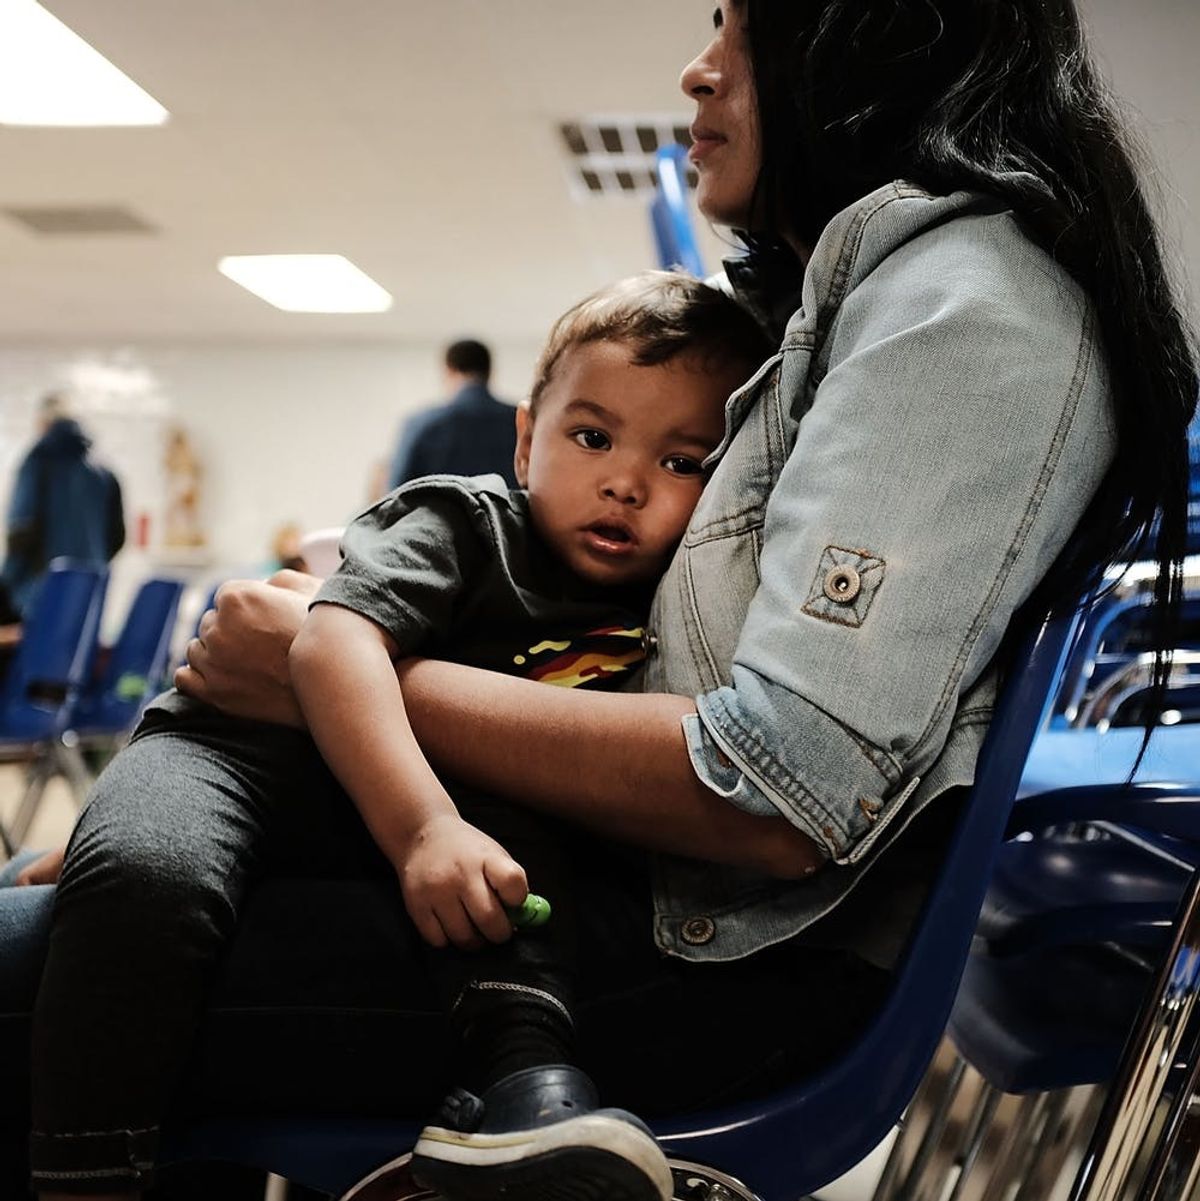 Despite Trump’s Executive Order, Migrant Kids Still Need Our Help as Much as Ever